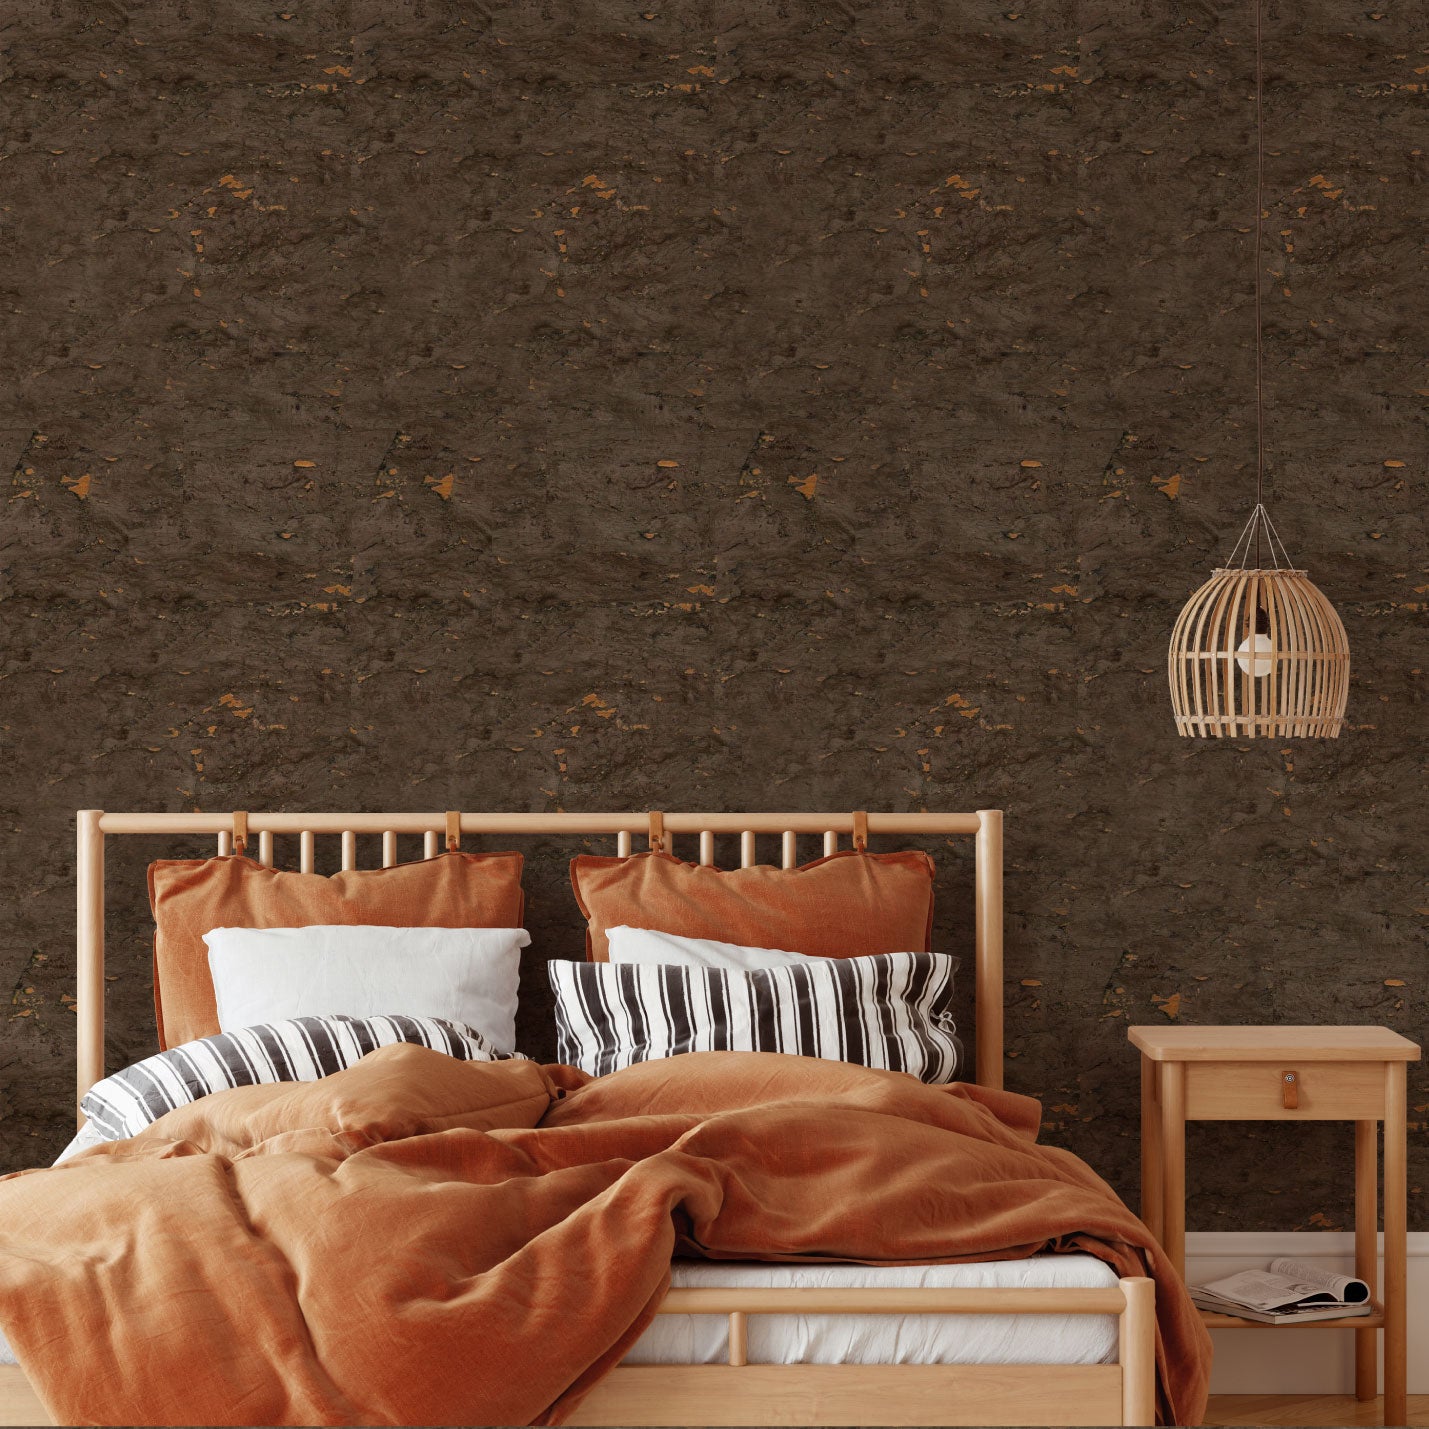 wallpaper Natural Textured Eco-Friendly Non-toxic High-quality  Sustainable Interior Design Bold Custom Tailor-made Retro chic cork anti-microbial moisture resistant nature wood grain lux metallic shiny cabin brown neutral bronze bedroom